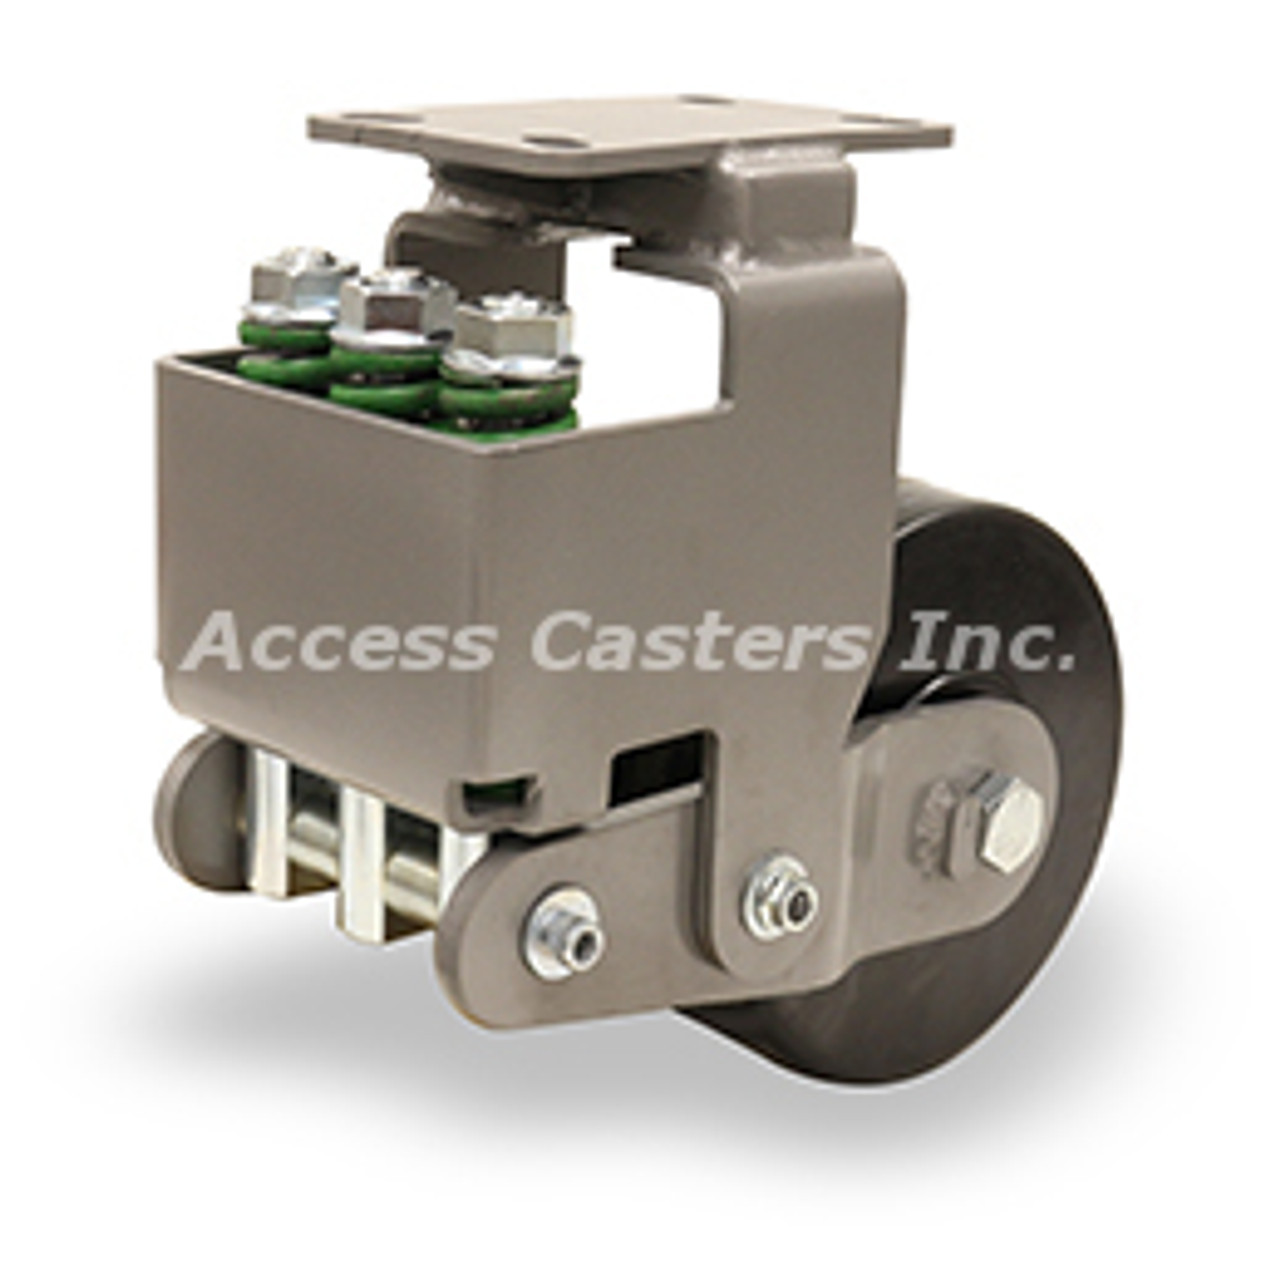 R-AEZFFM-63PH Spring loaded caster with 6" x 3" PH wheel